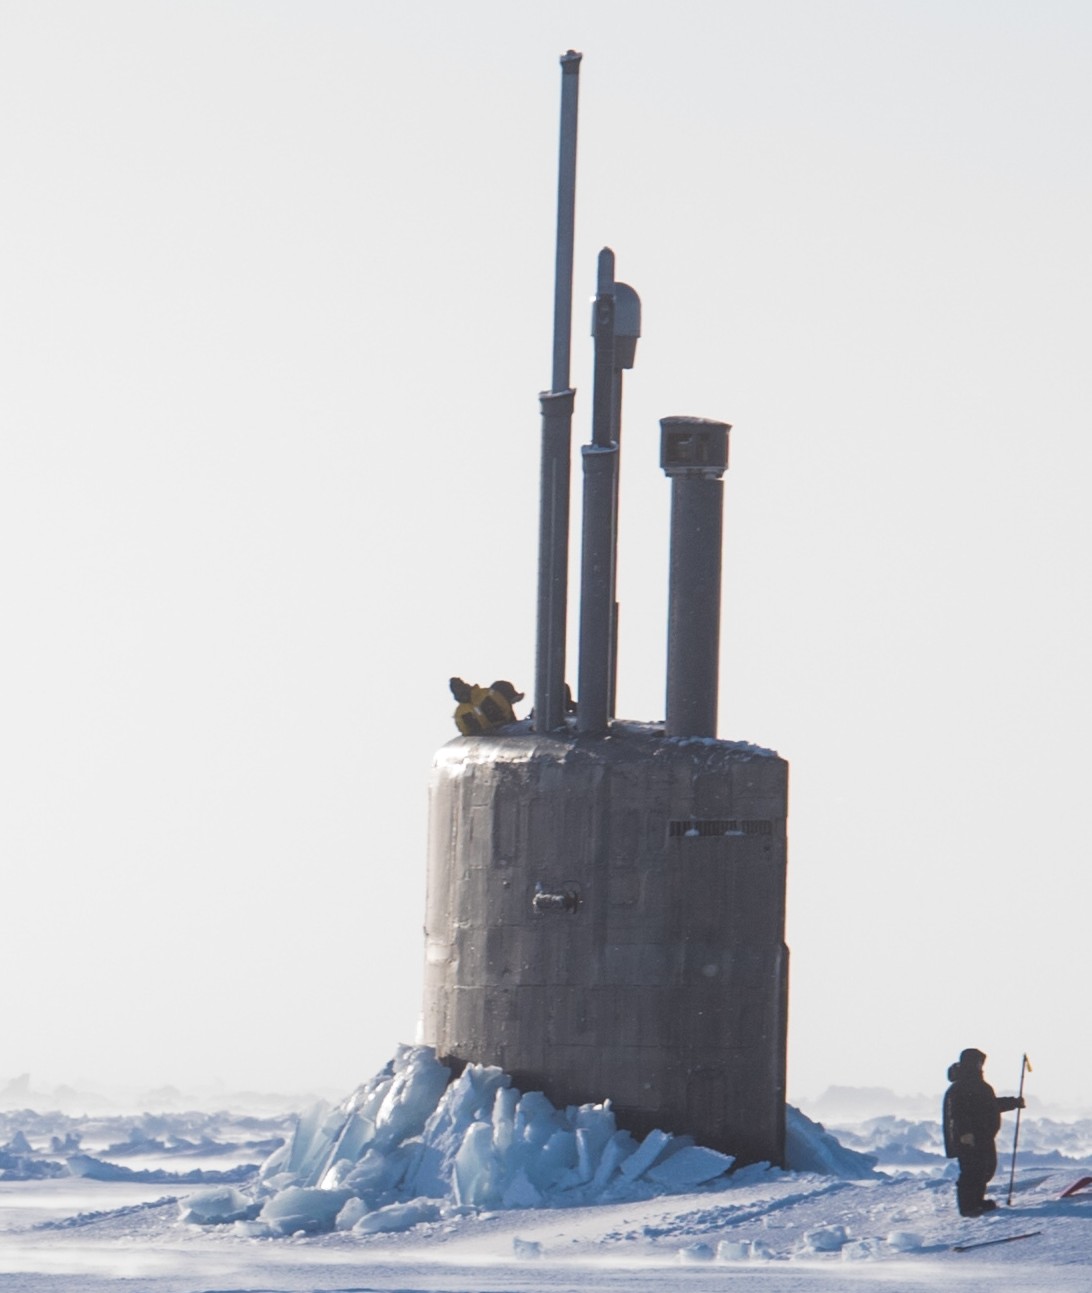 ssn-22 uss connecticut seawolf class attack submarine us navy exercise icex 18 arctic ocean 36